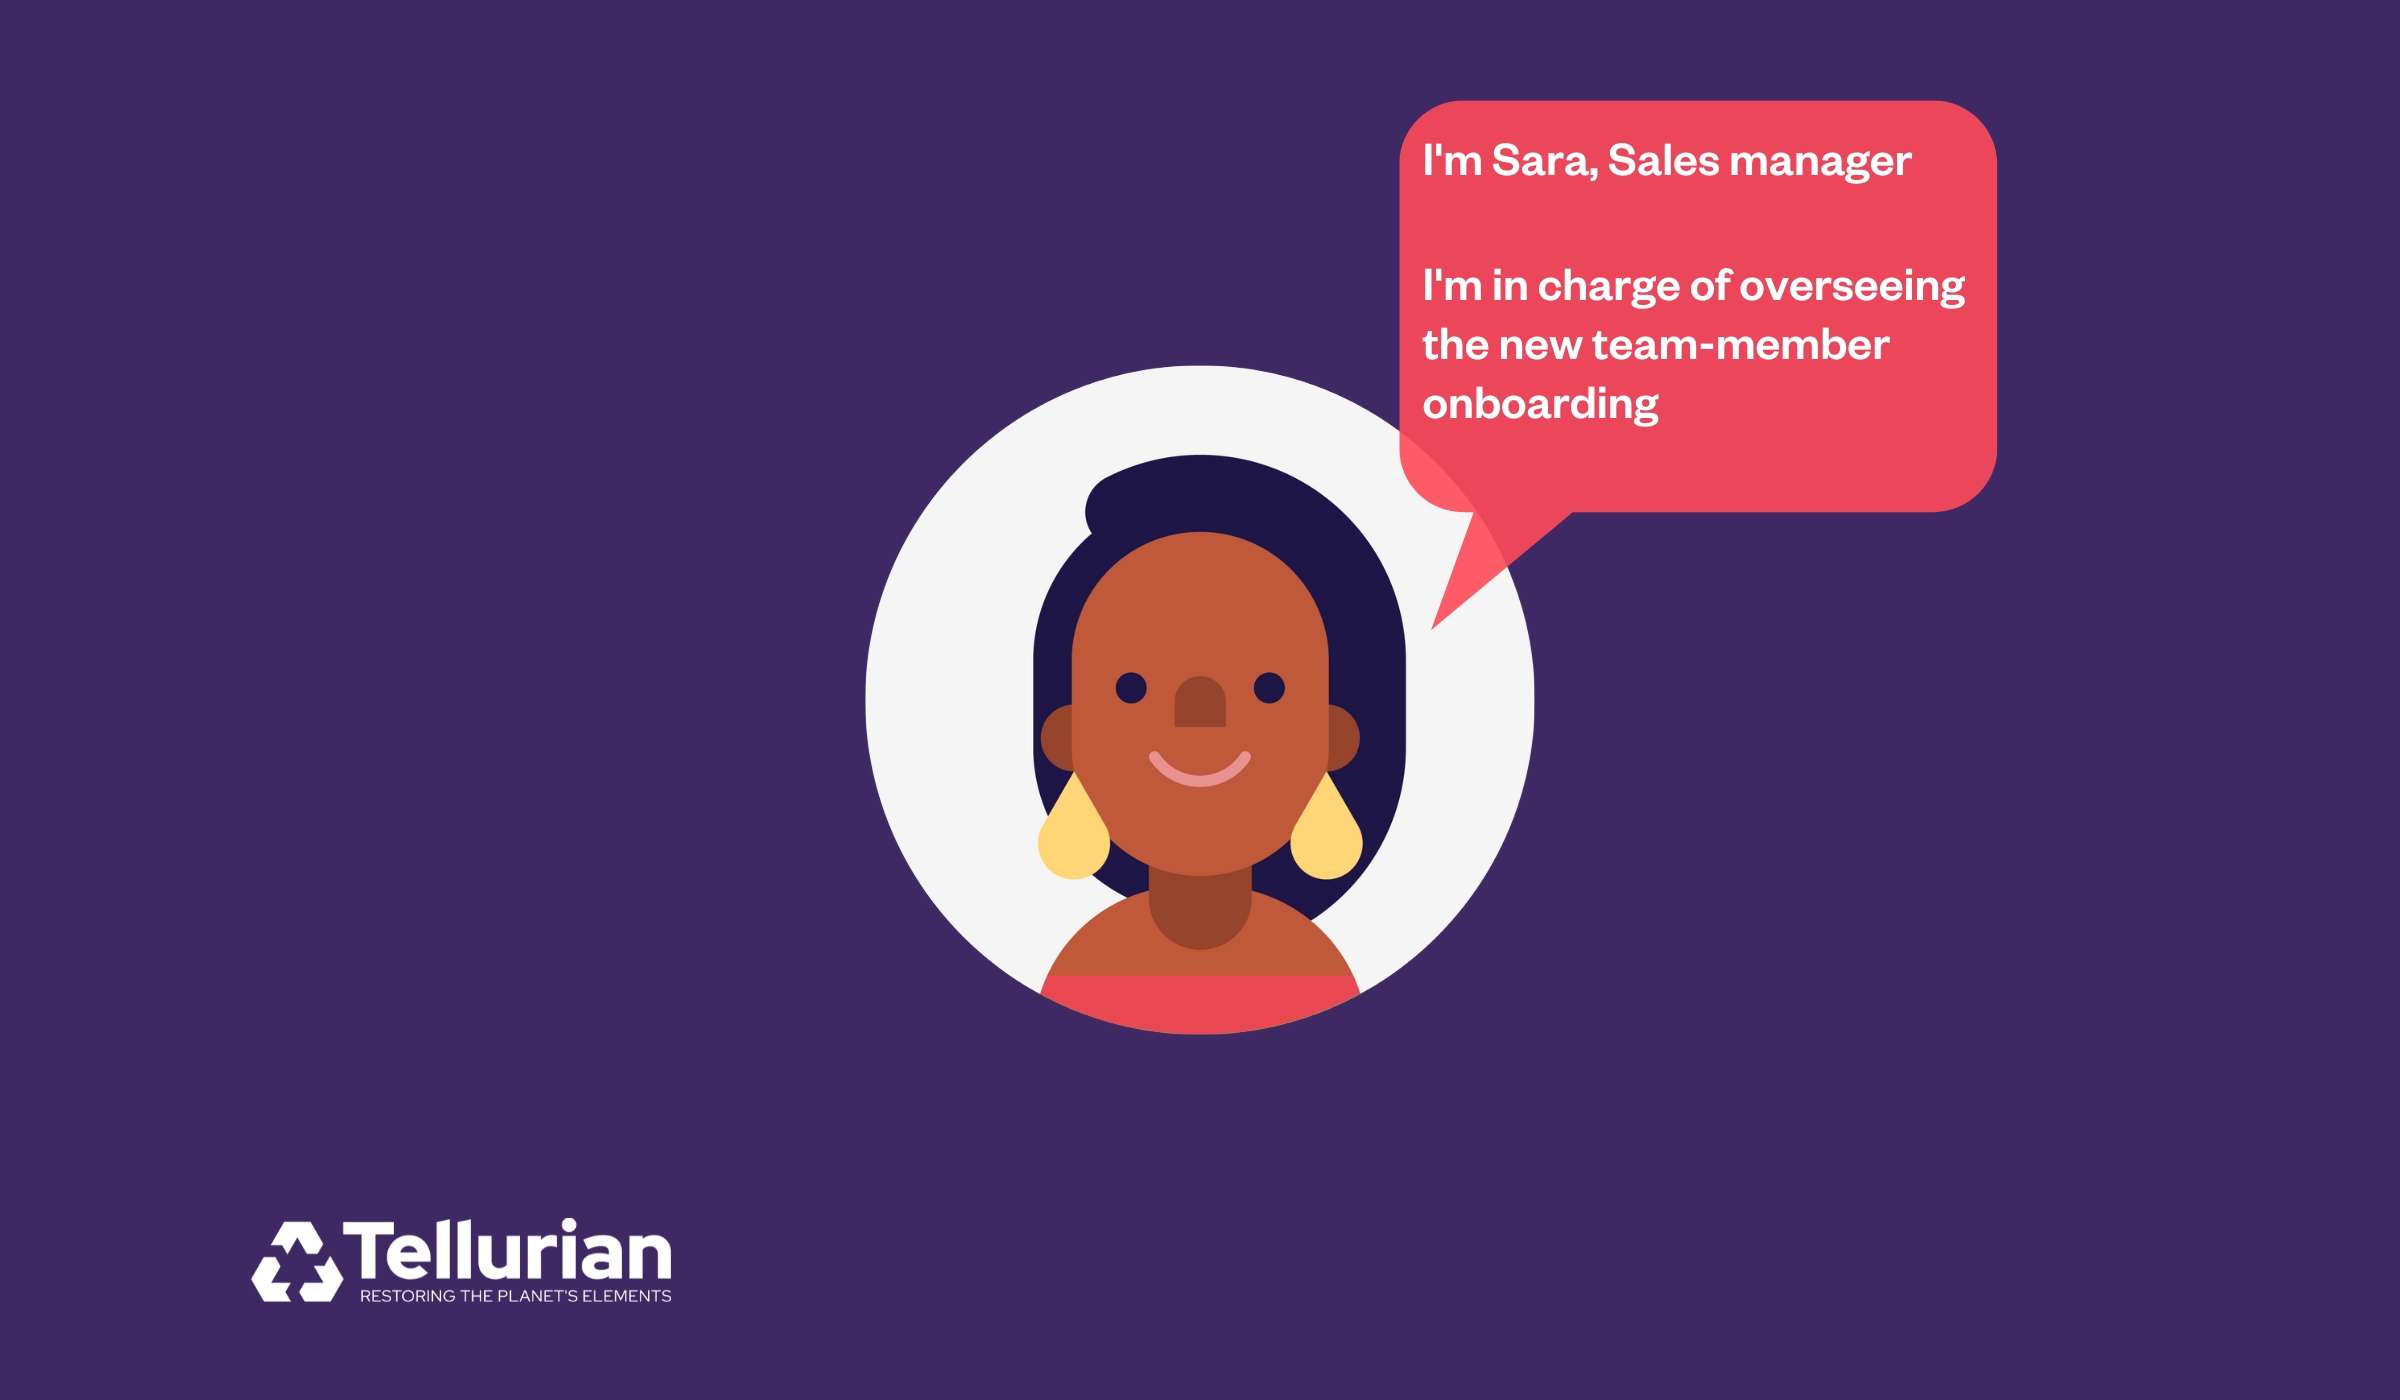 Meet Sara, sales manager at Tellurian. A new team member will join Sara's team and she is in charge of overseeing the onboarding and ensuring it goes smoothly.